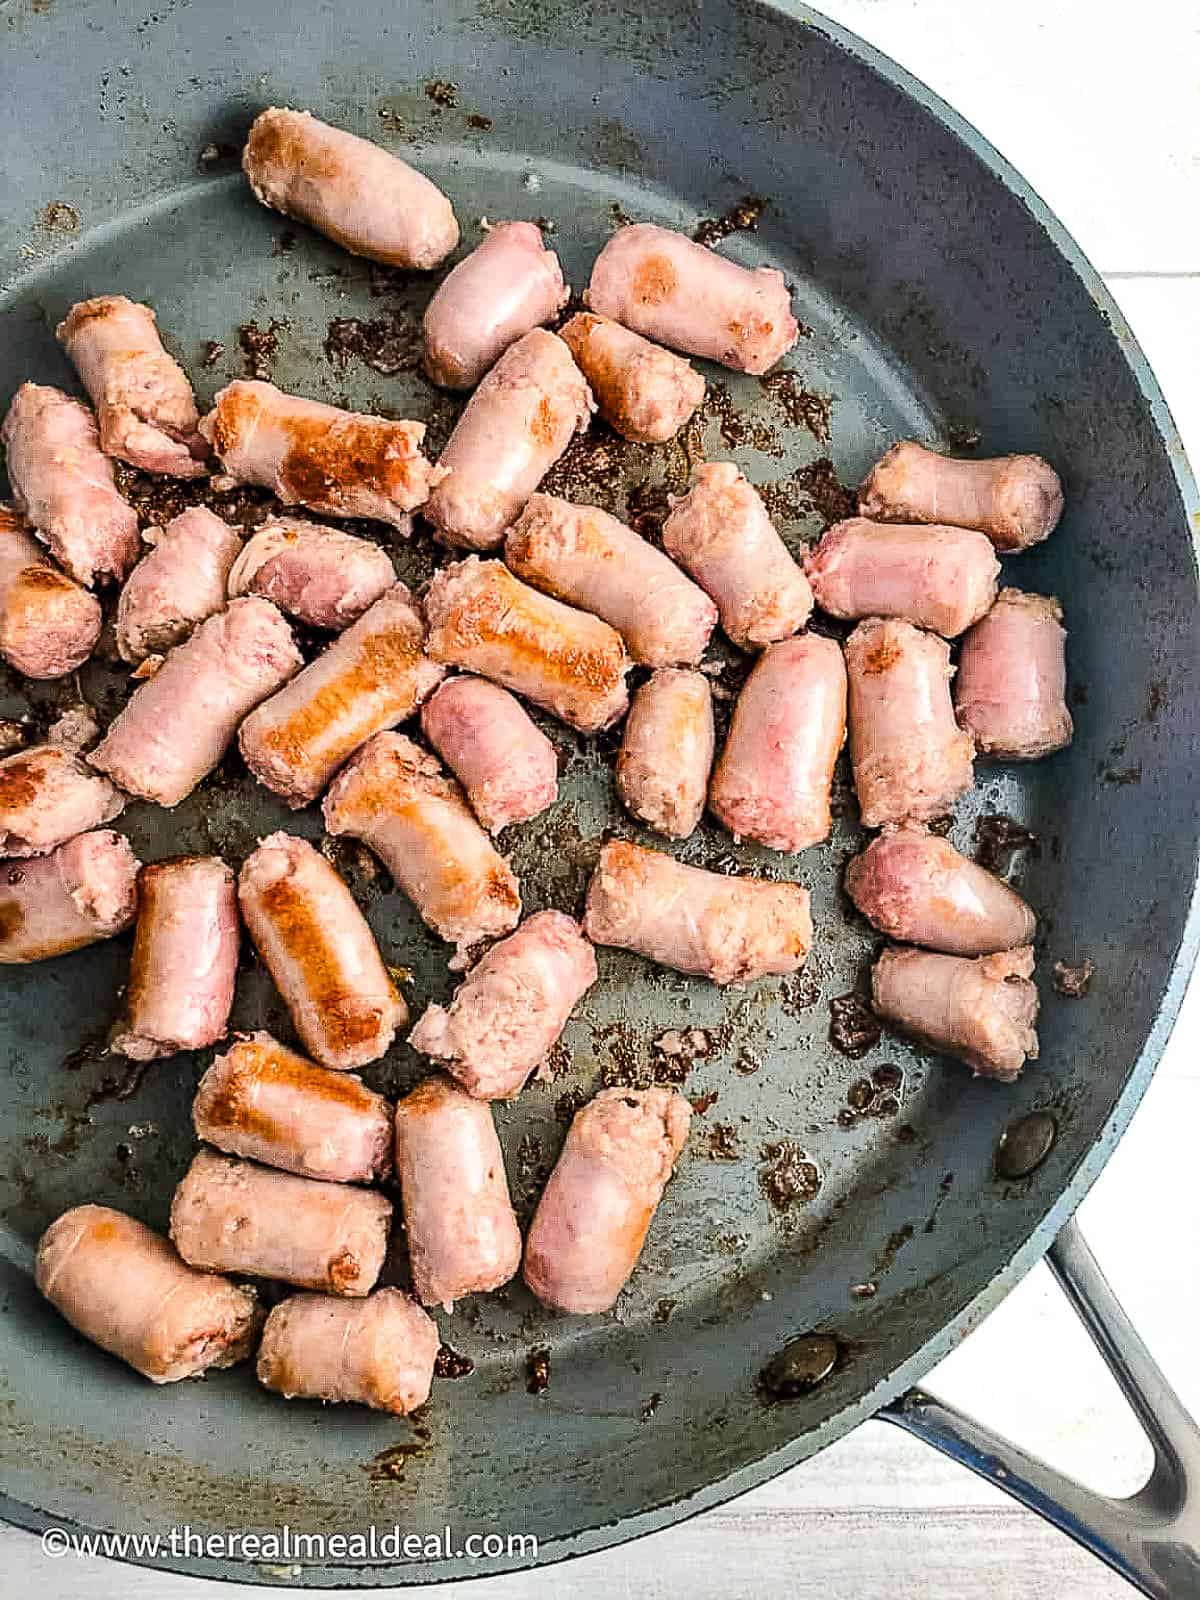 sausages cut into bite sized pieces frying in pan.